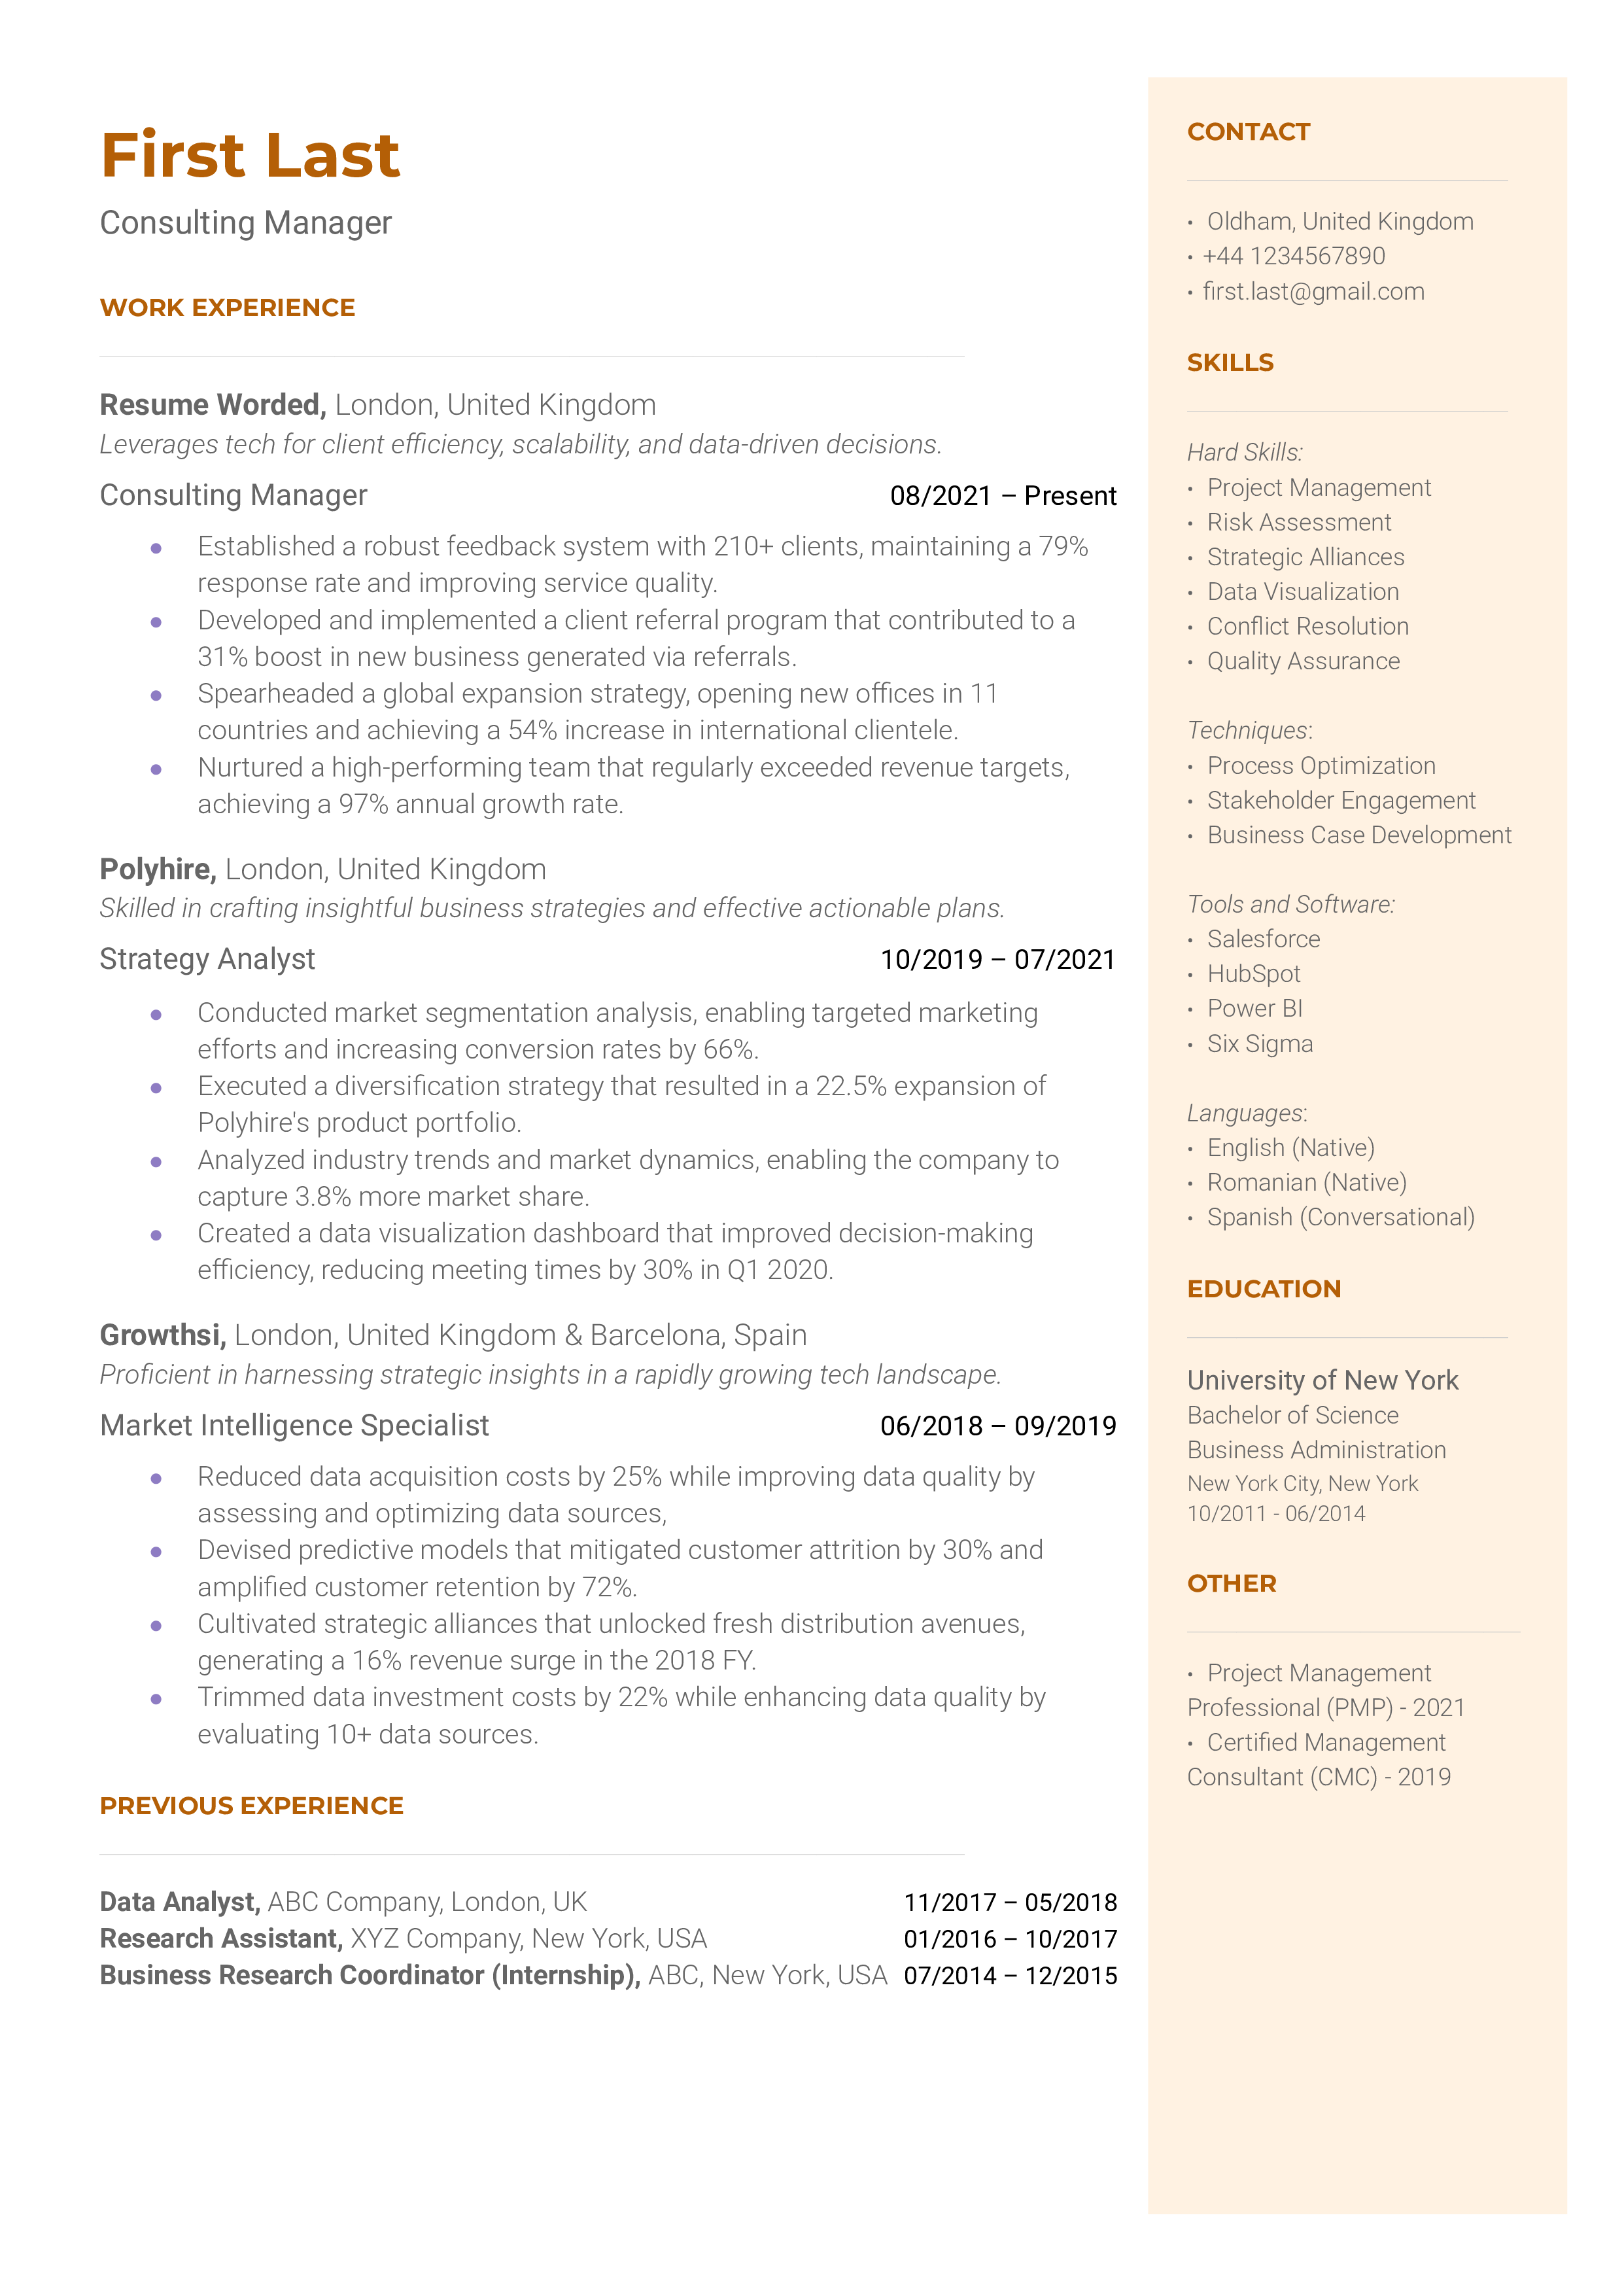 Consulting Manager Resume Sample